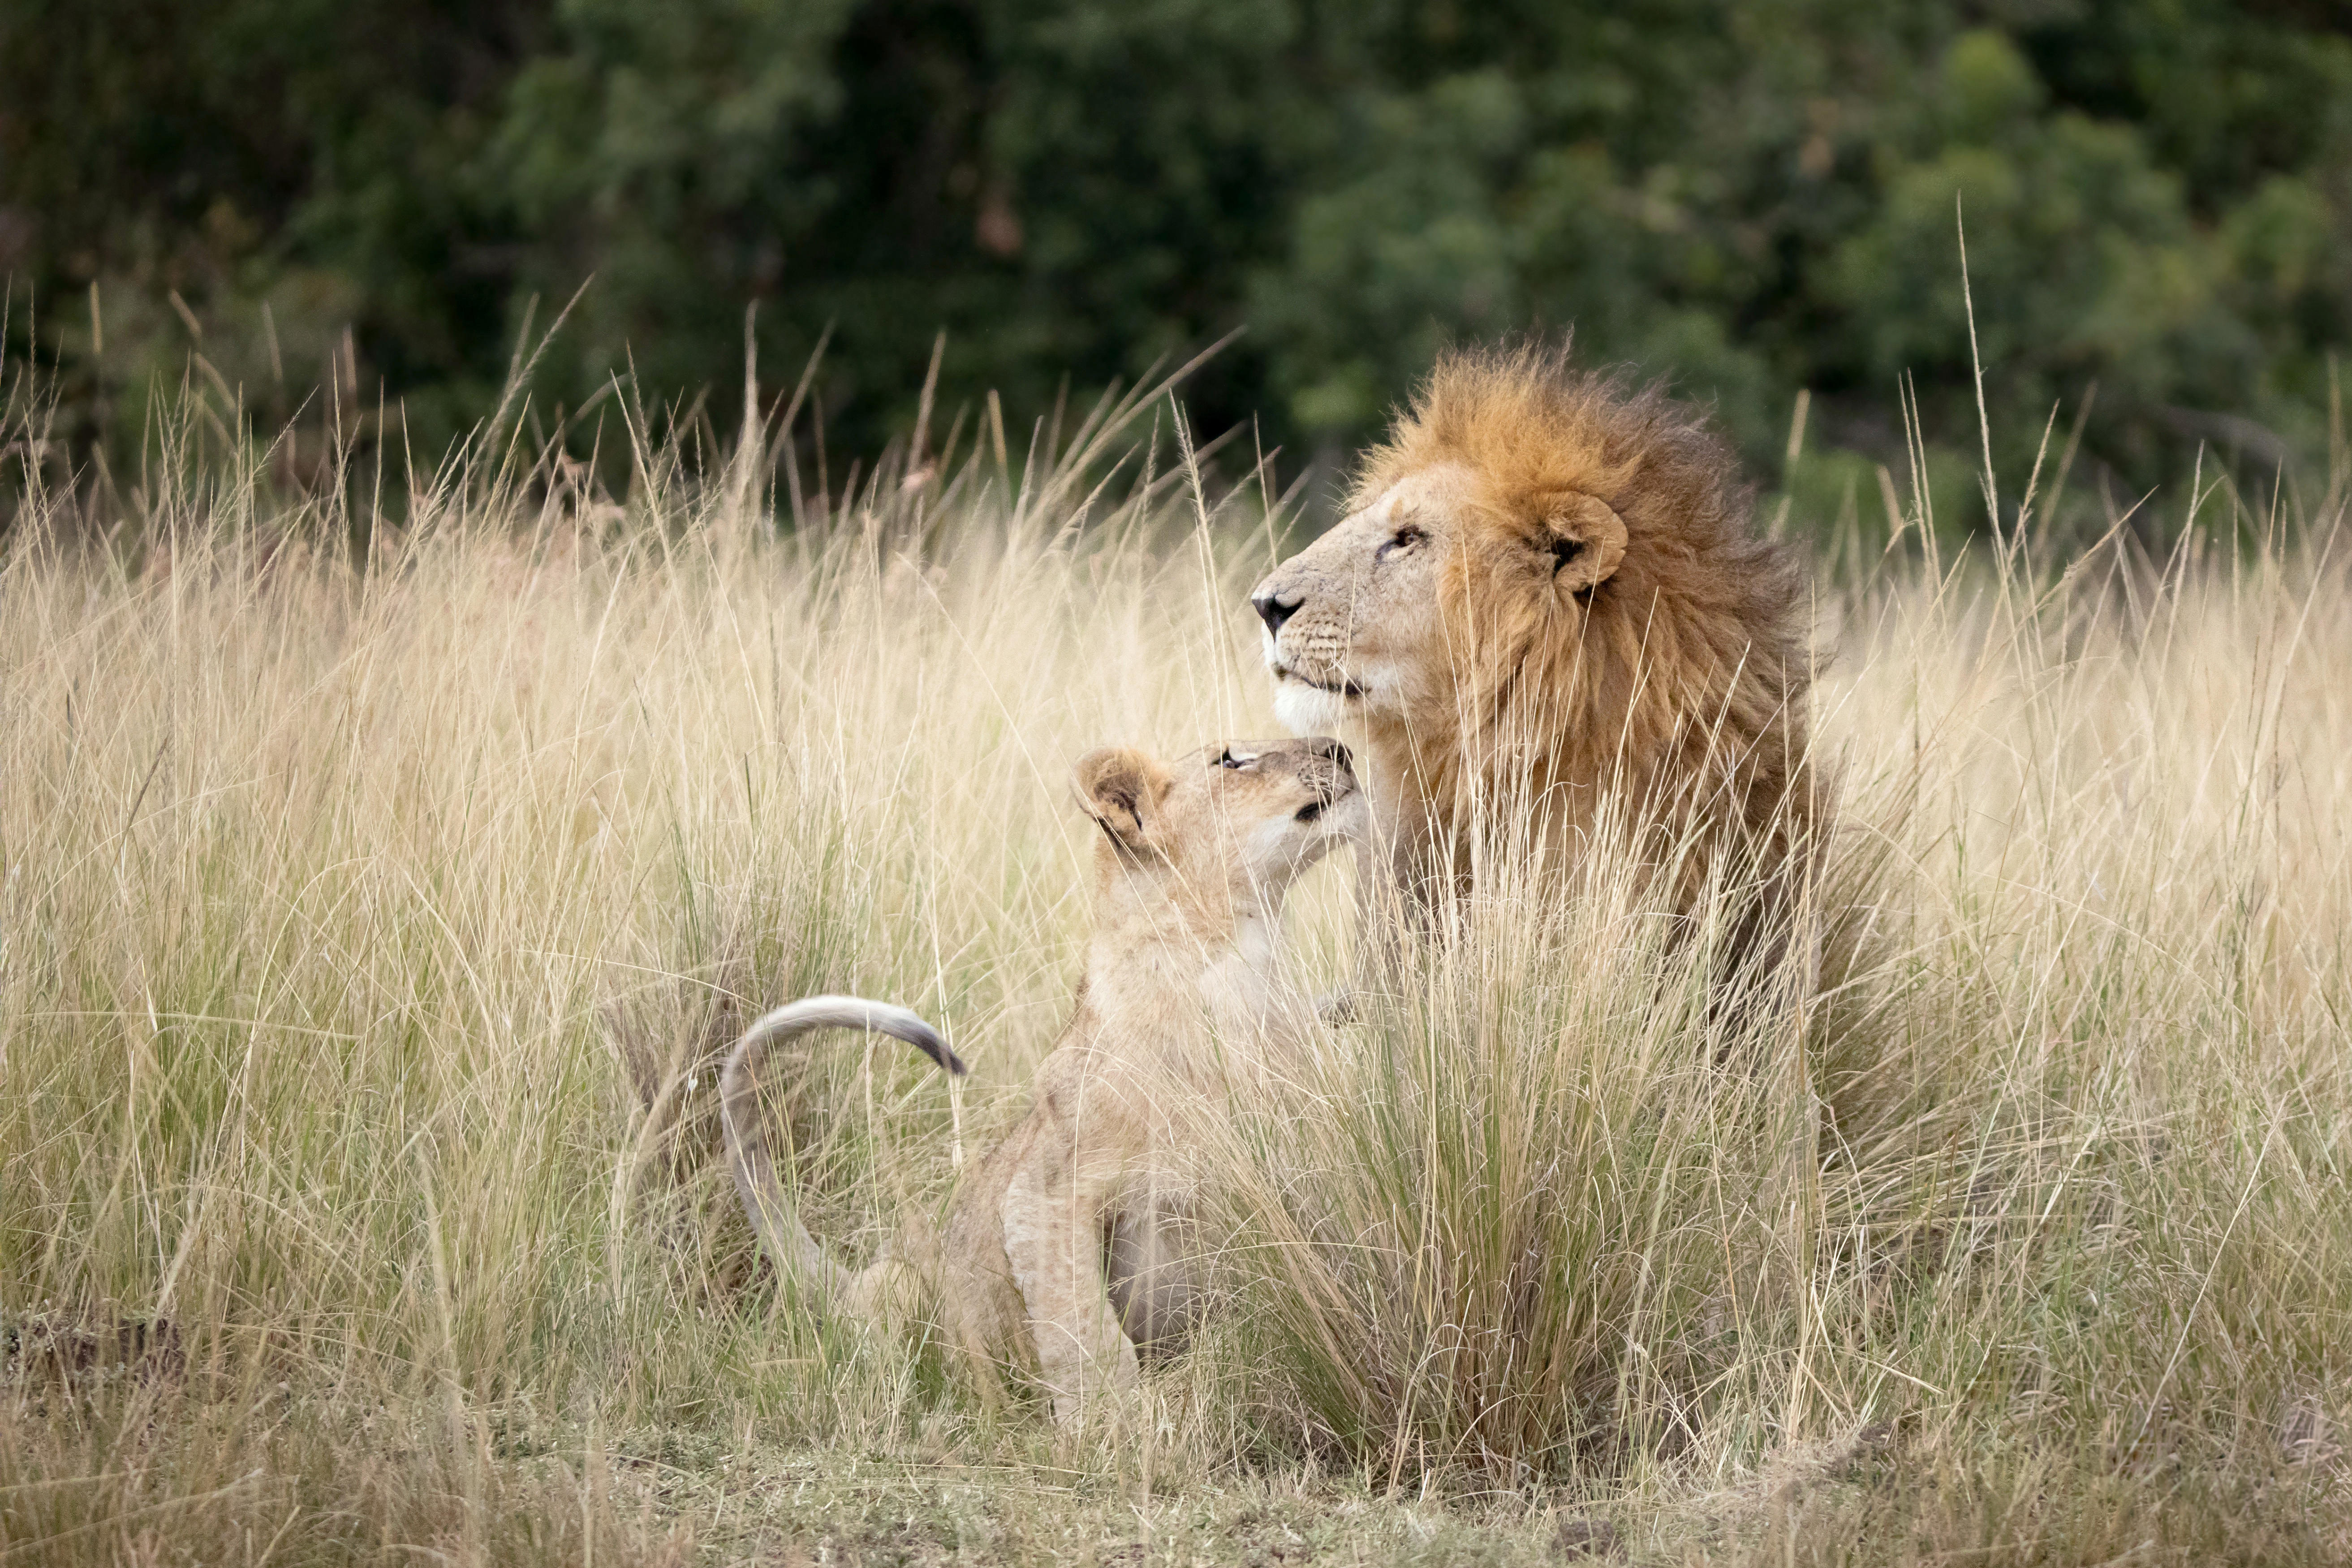 The Fast, Furious and Brutally Short Life of an African Male Lion